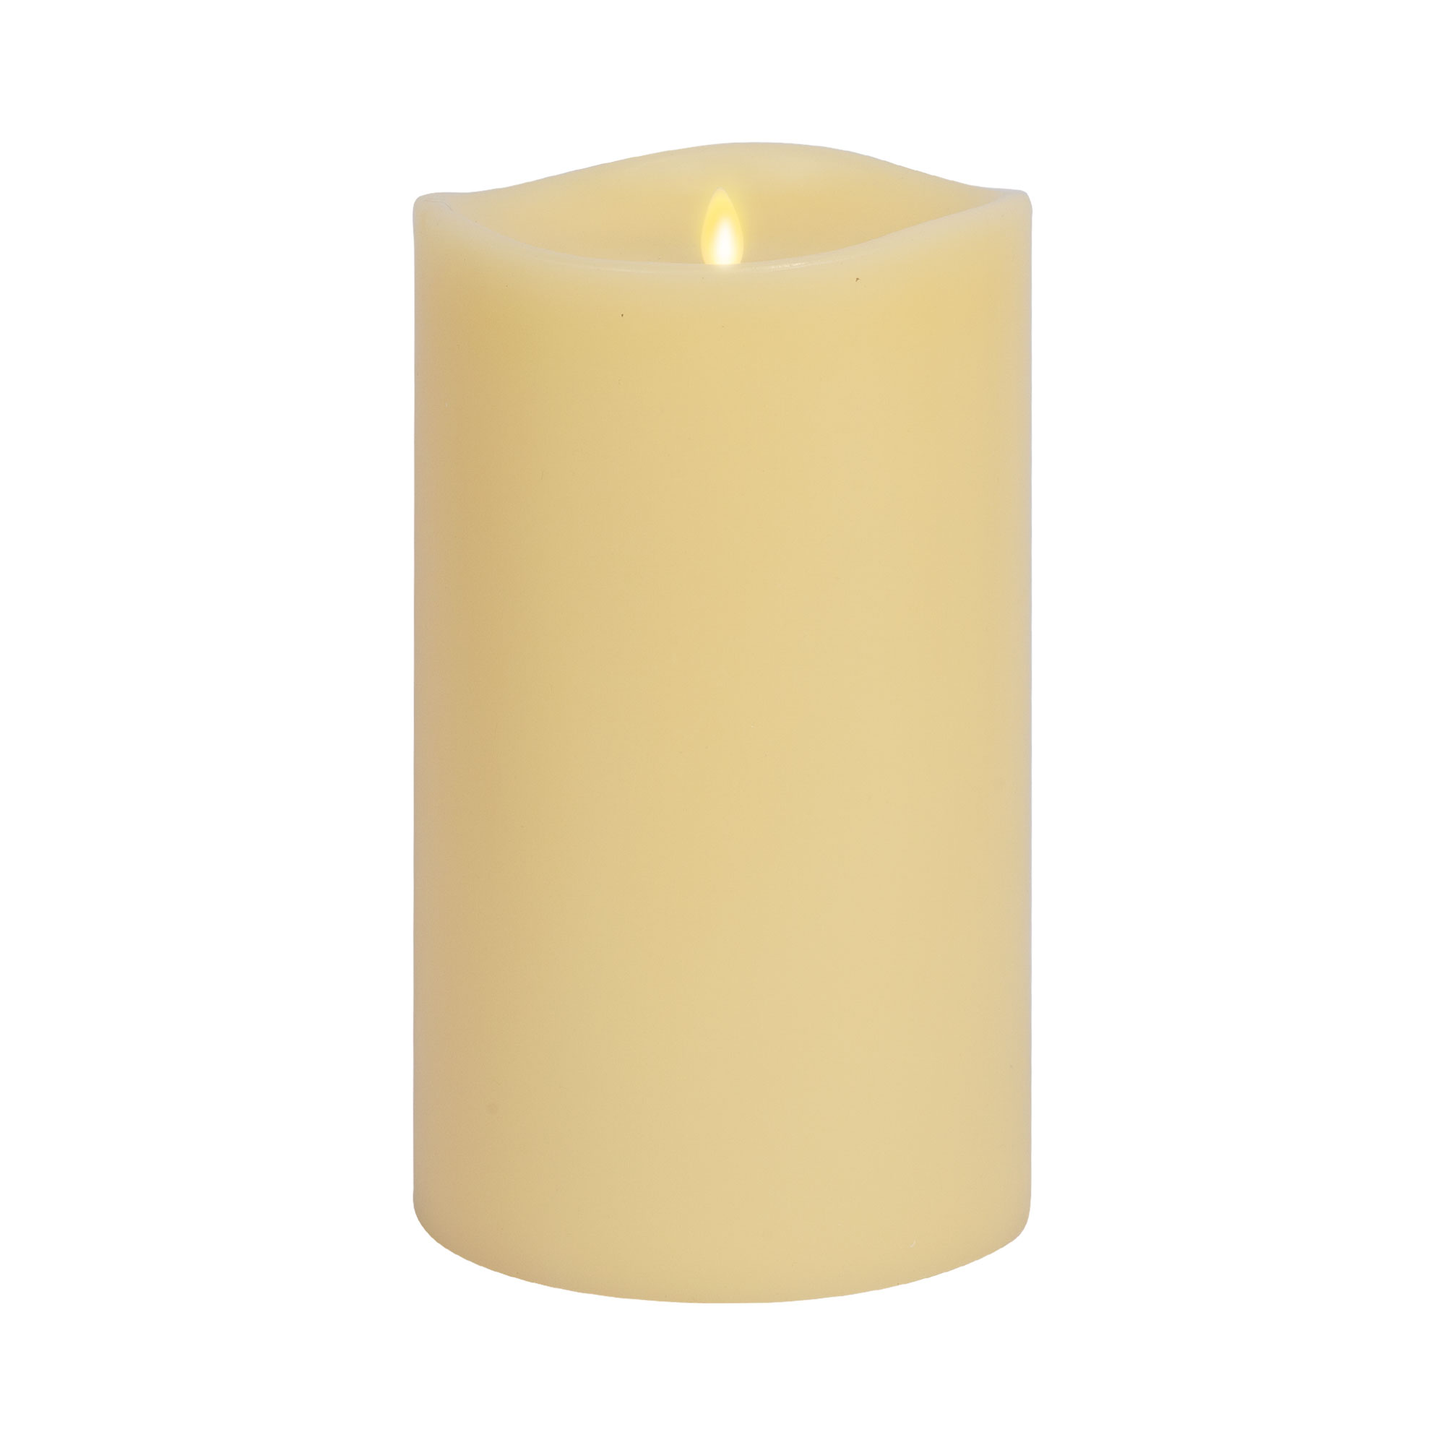 Ivory Flameless Candle Grand Pillar - Melted Top - 6.25" Width